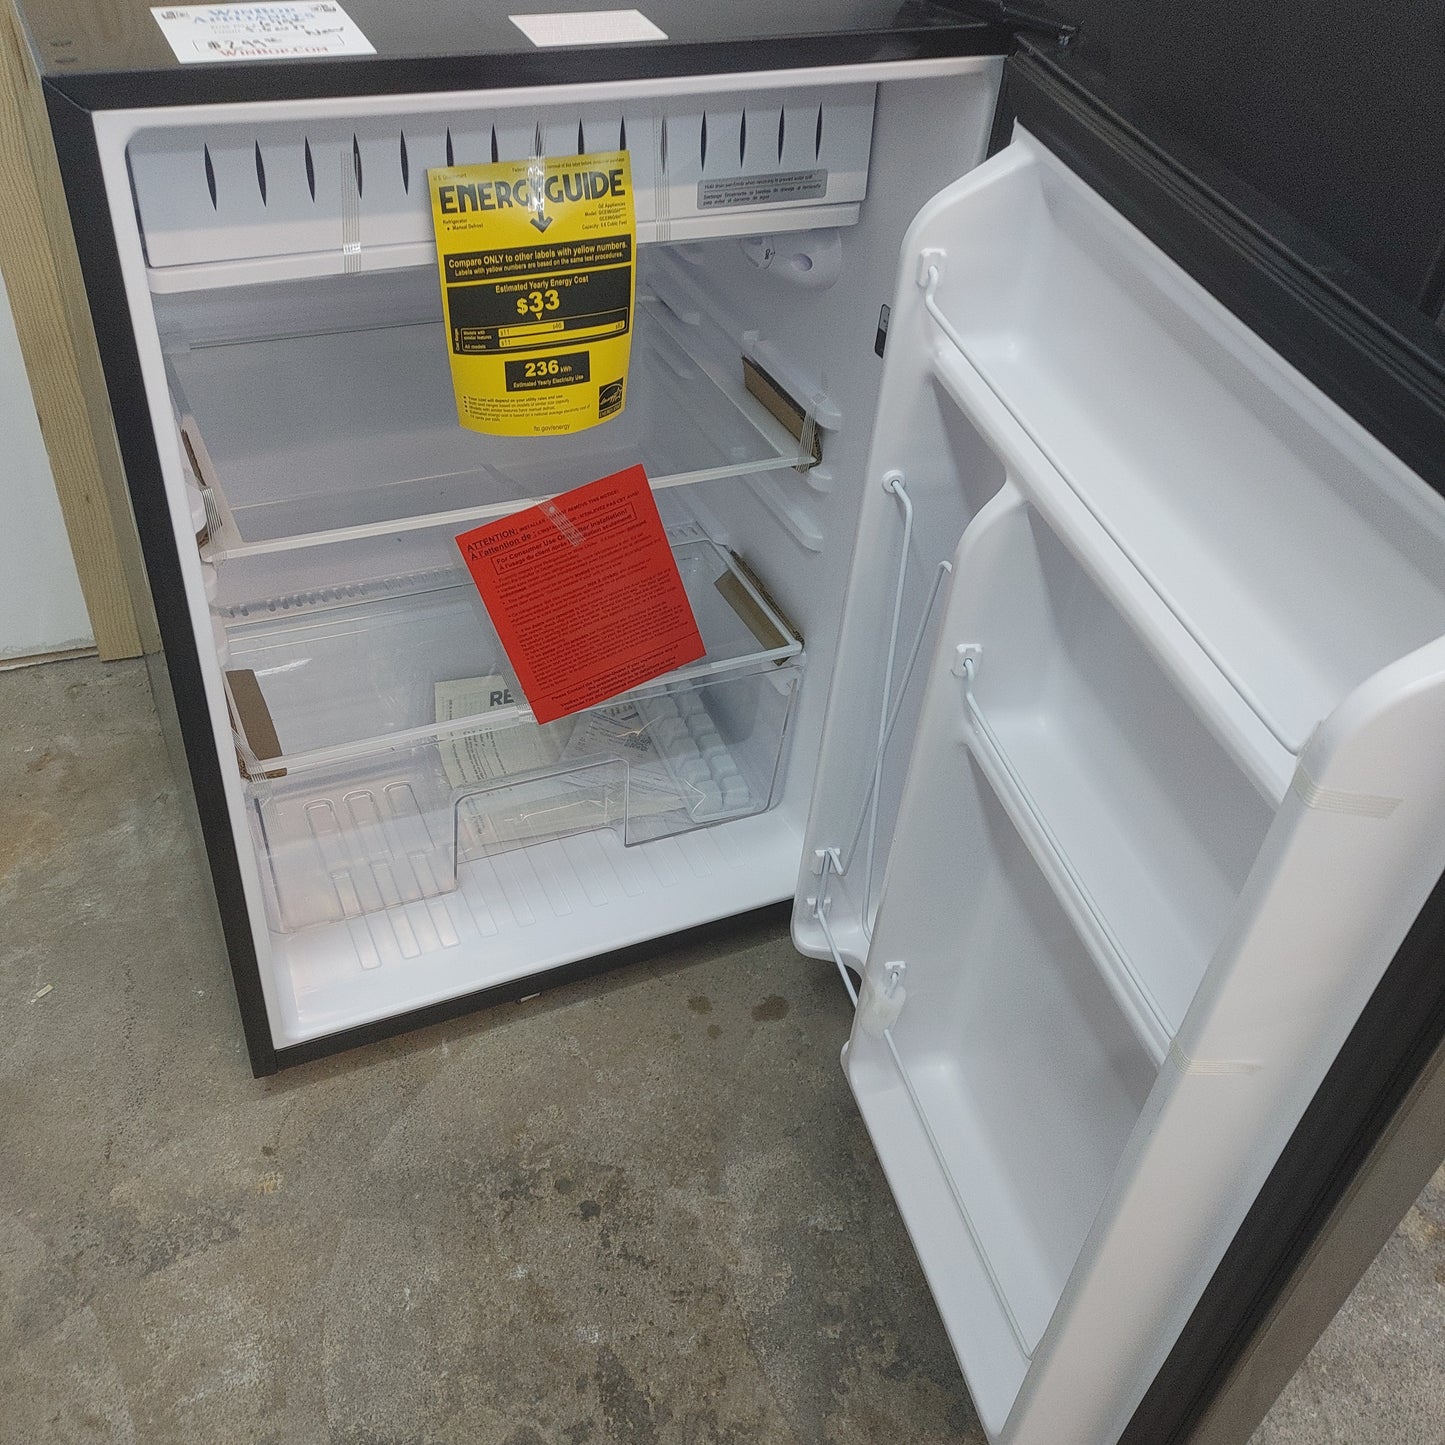 New GE 5.6 cubic ft Small Refrigerator with freezer compartment